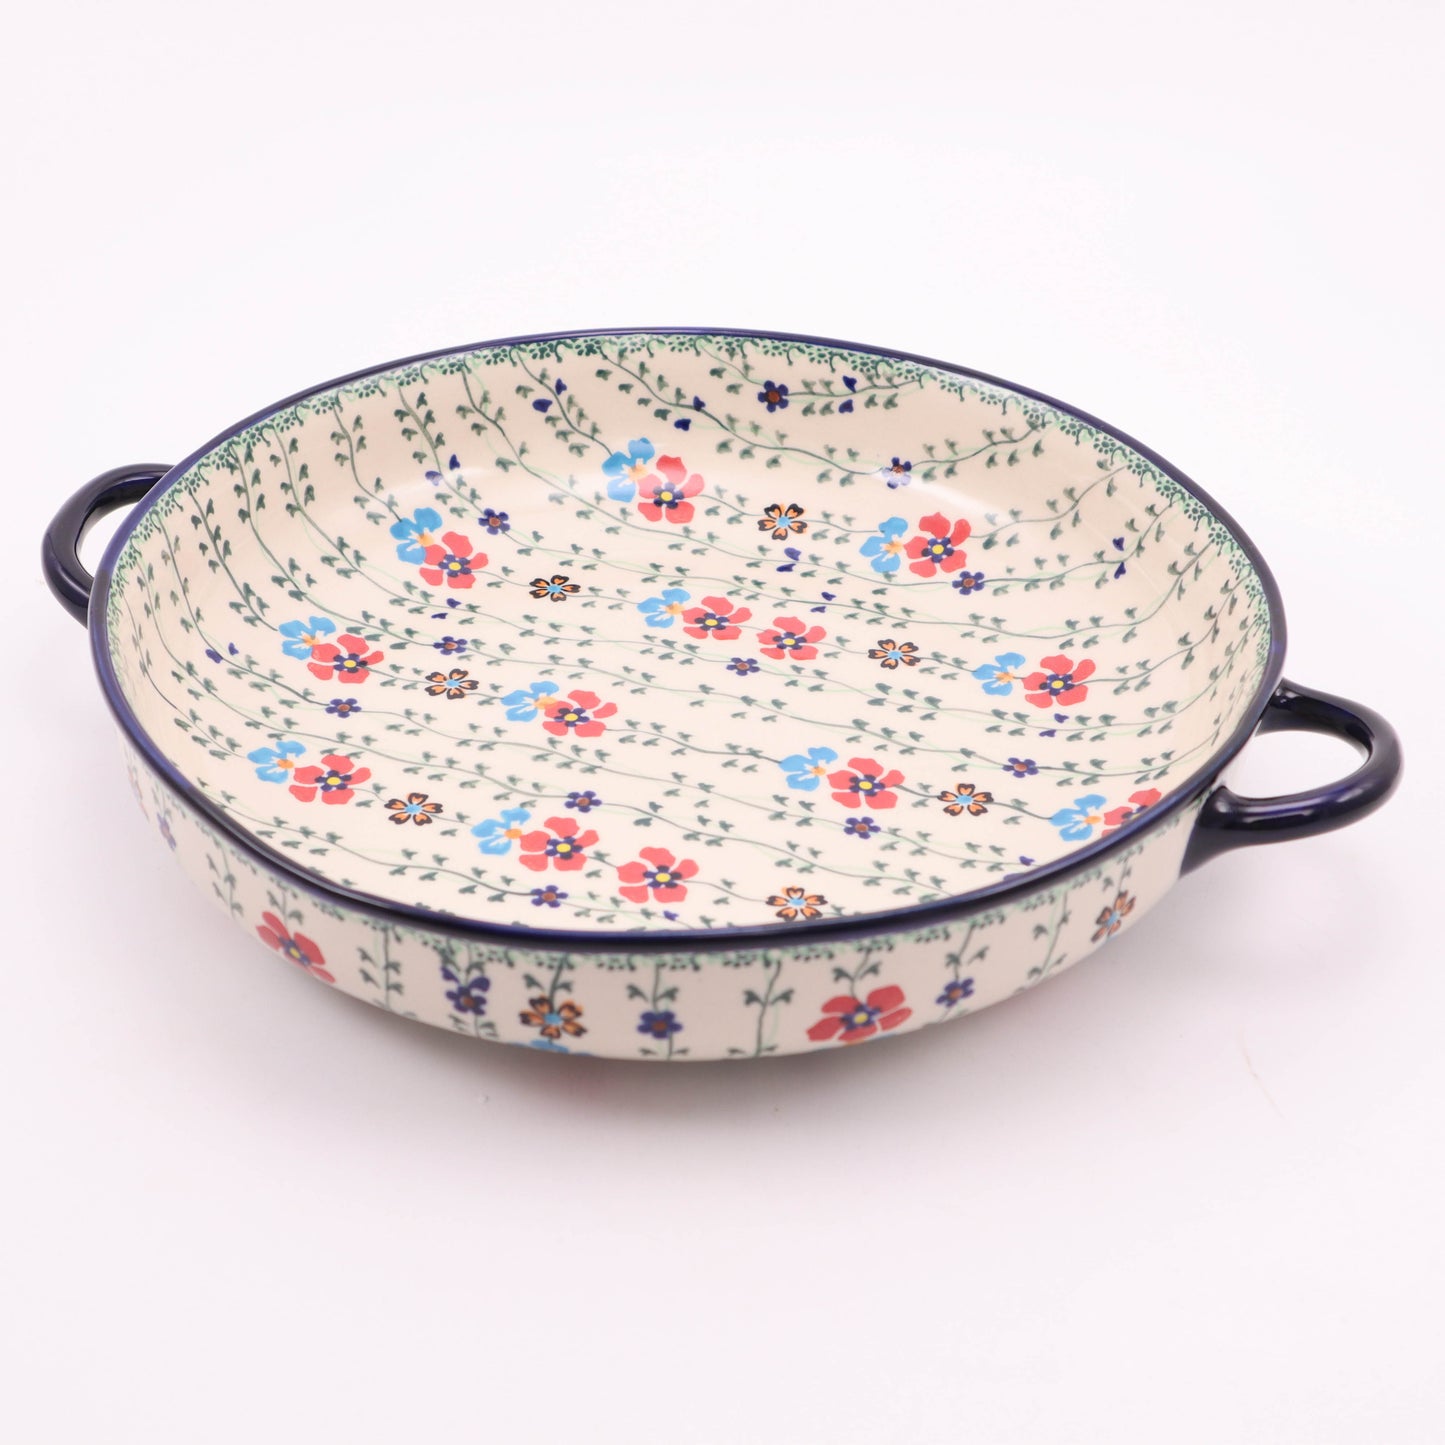 10.5" Round Baker With Handles Pattern: 017